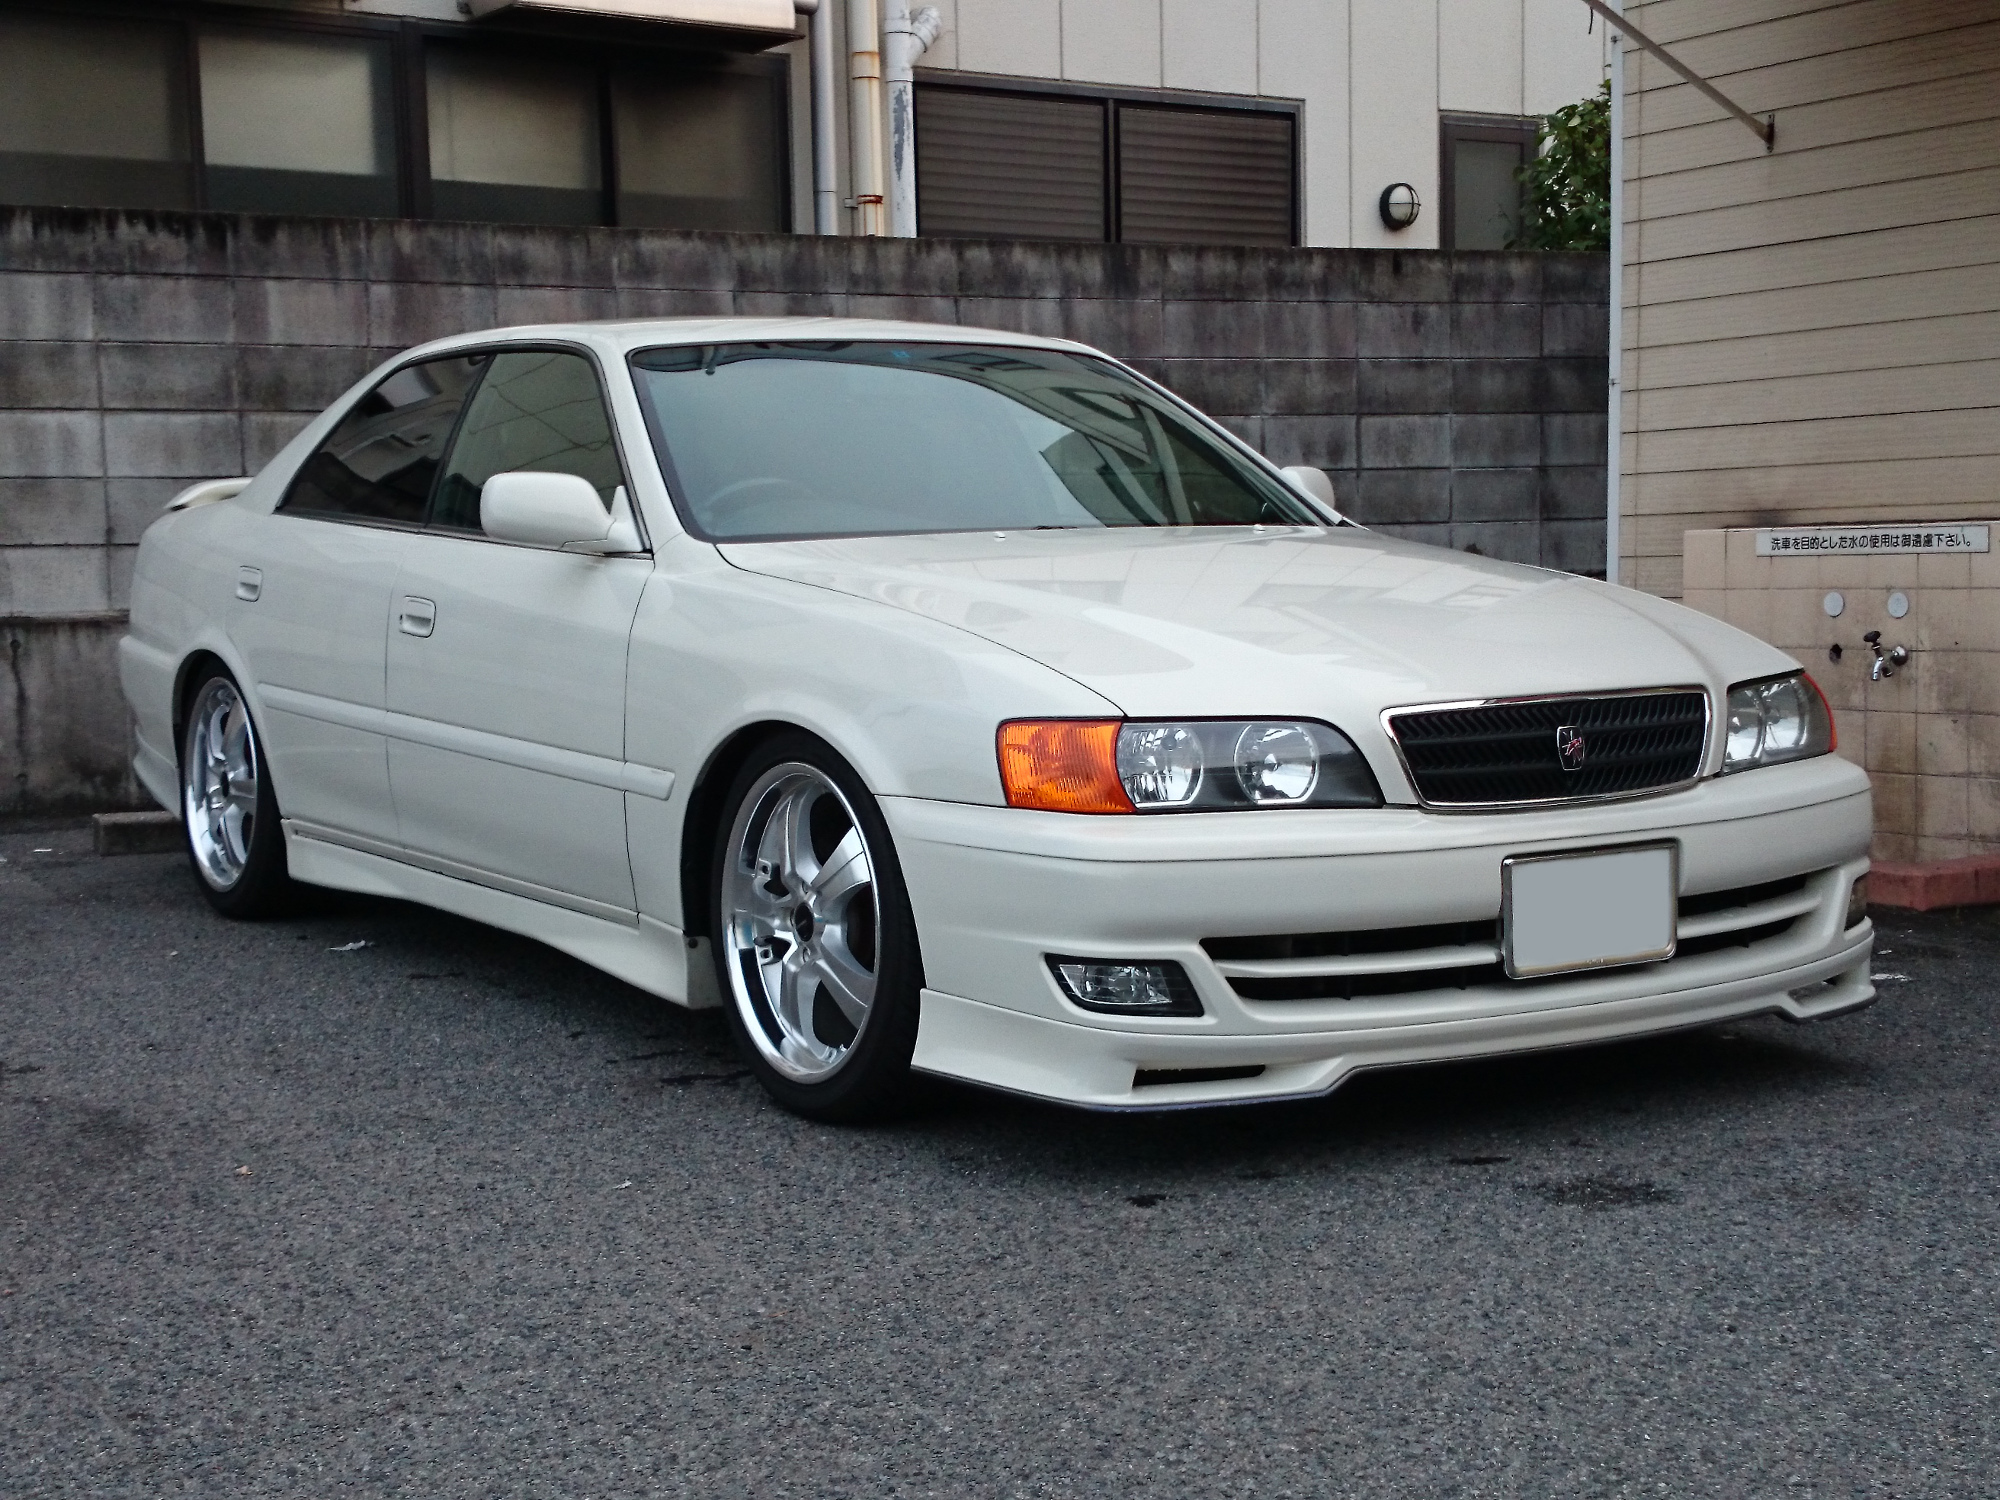 10 Things You Need to Know About the Toyota Chaser JZX100